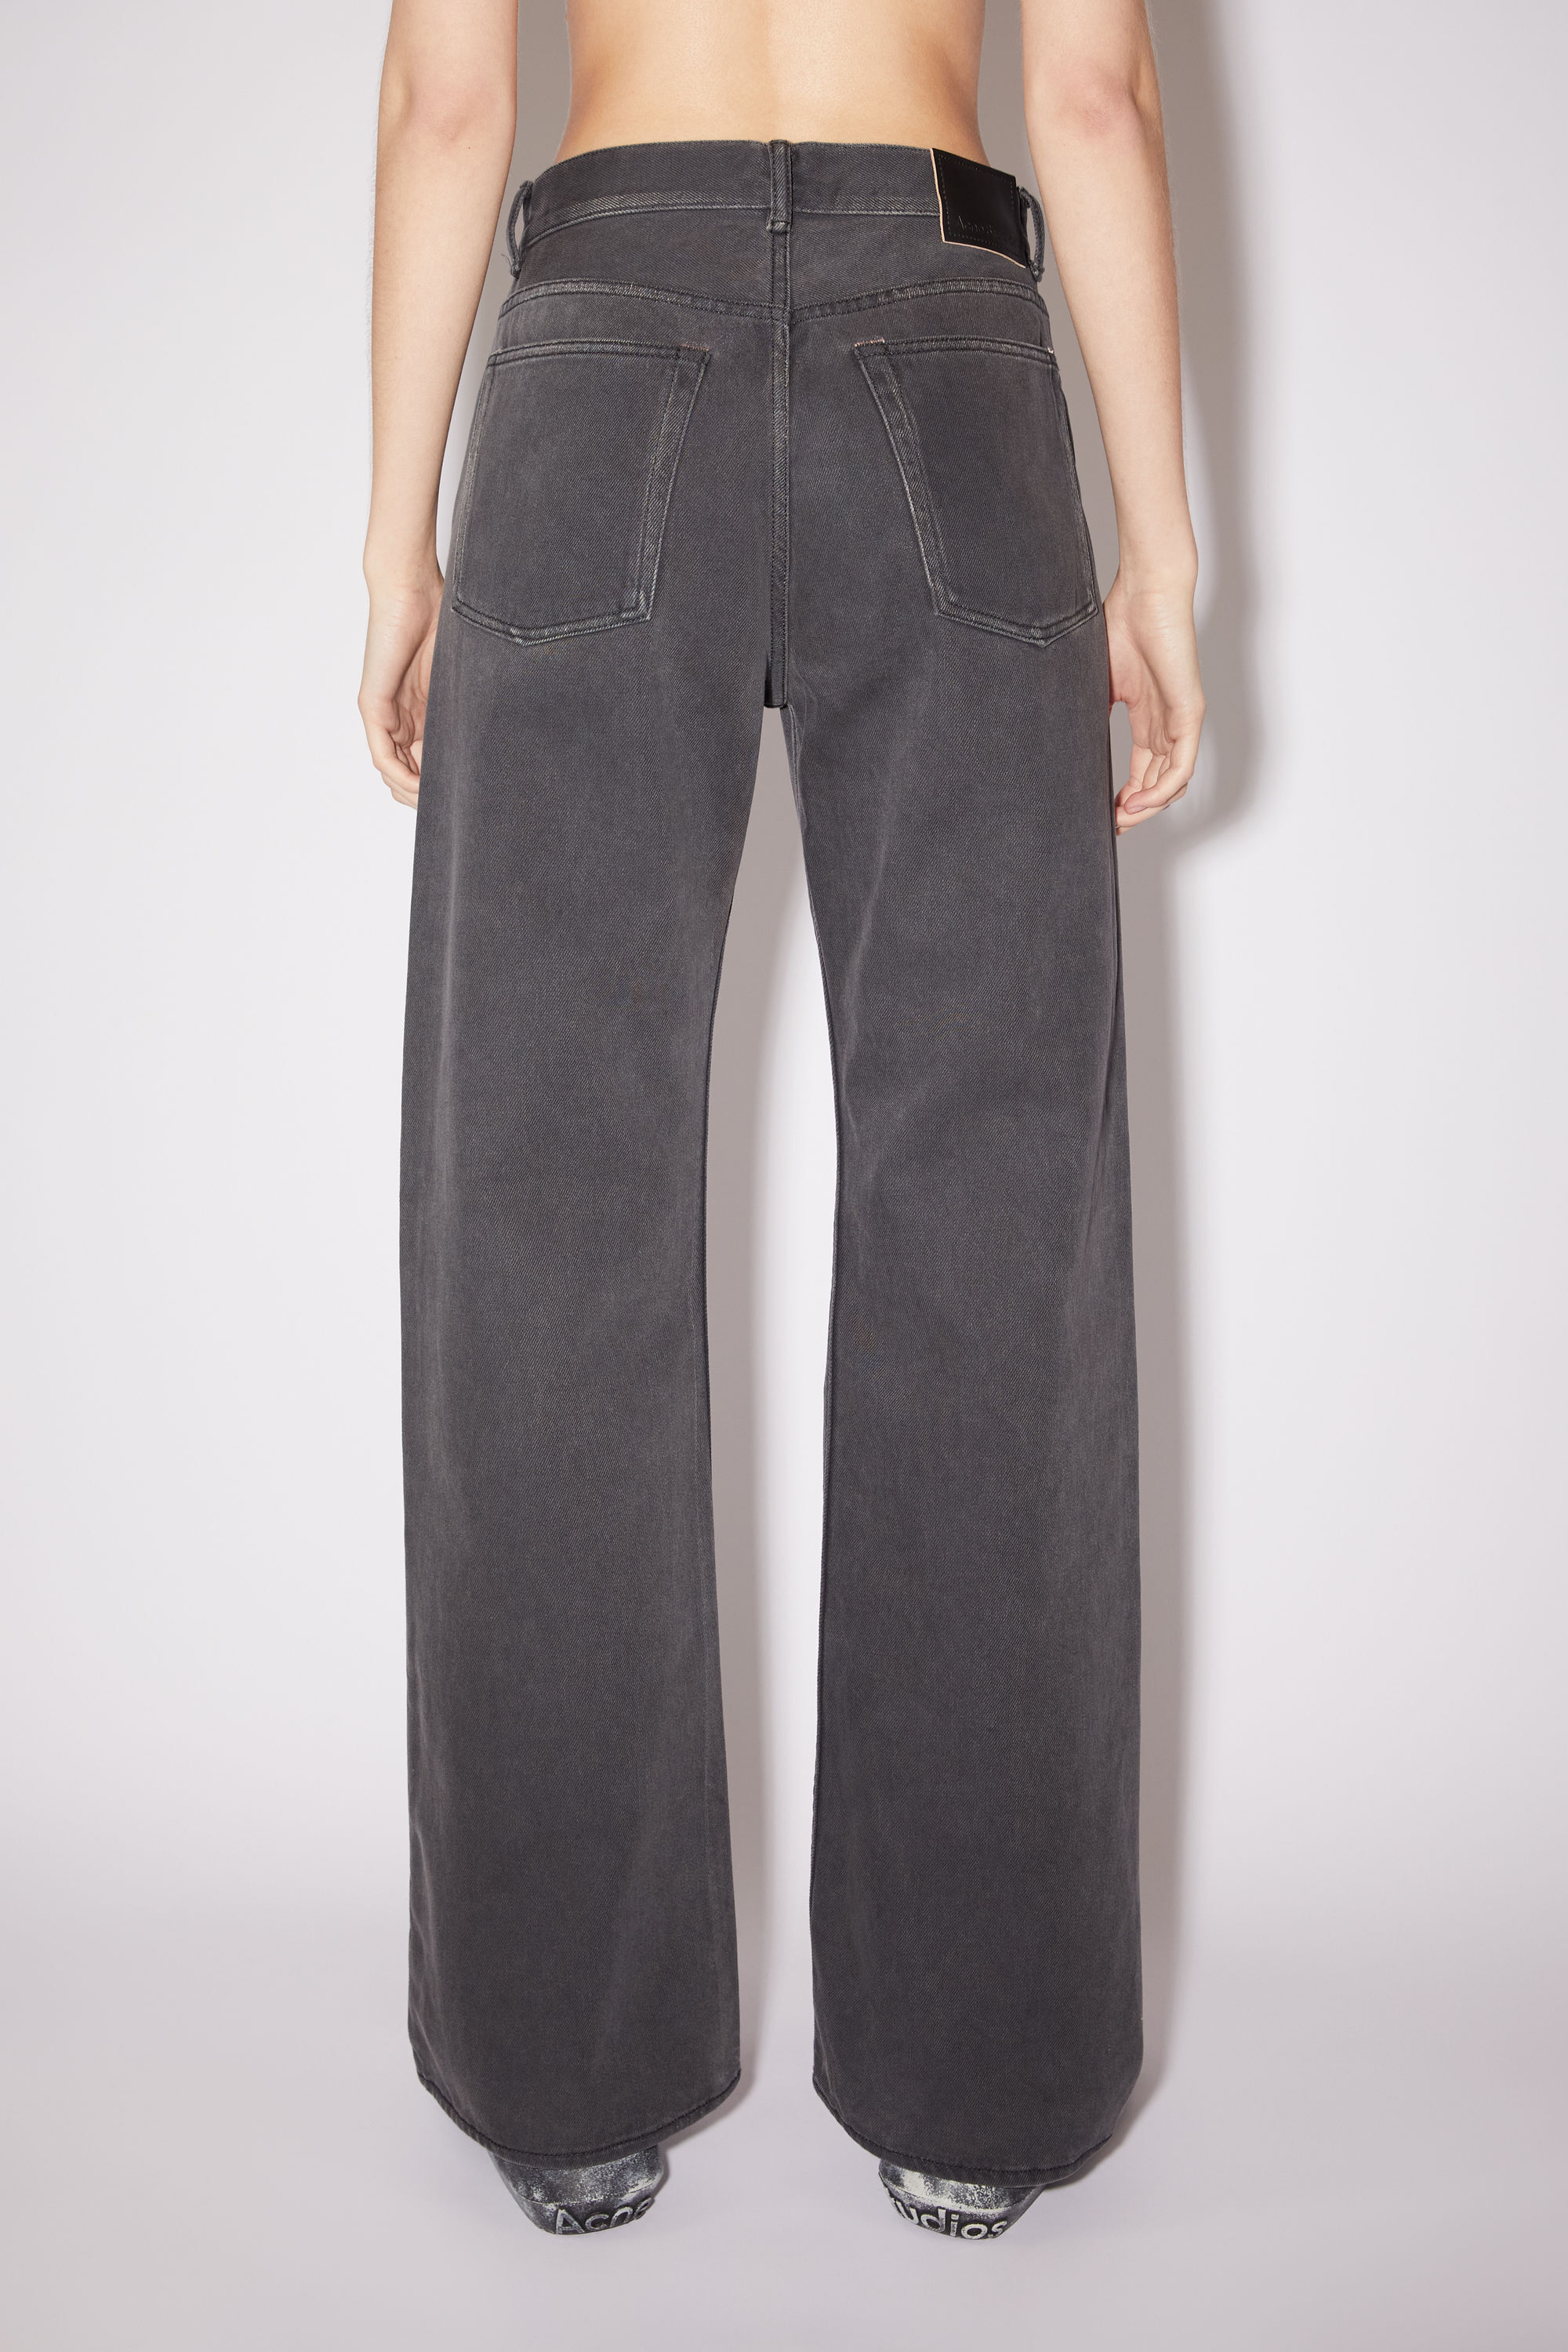 acne studious loose fit jeans